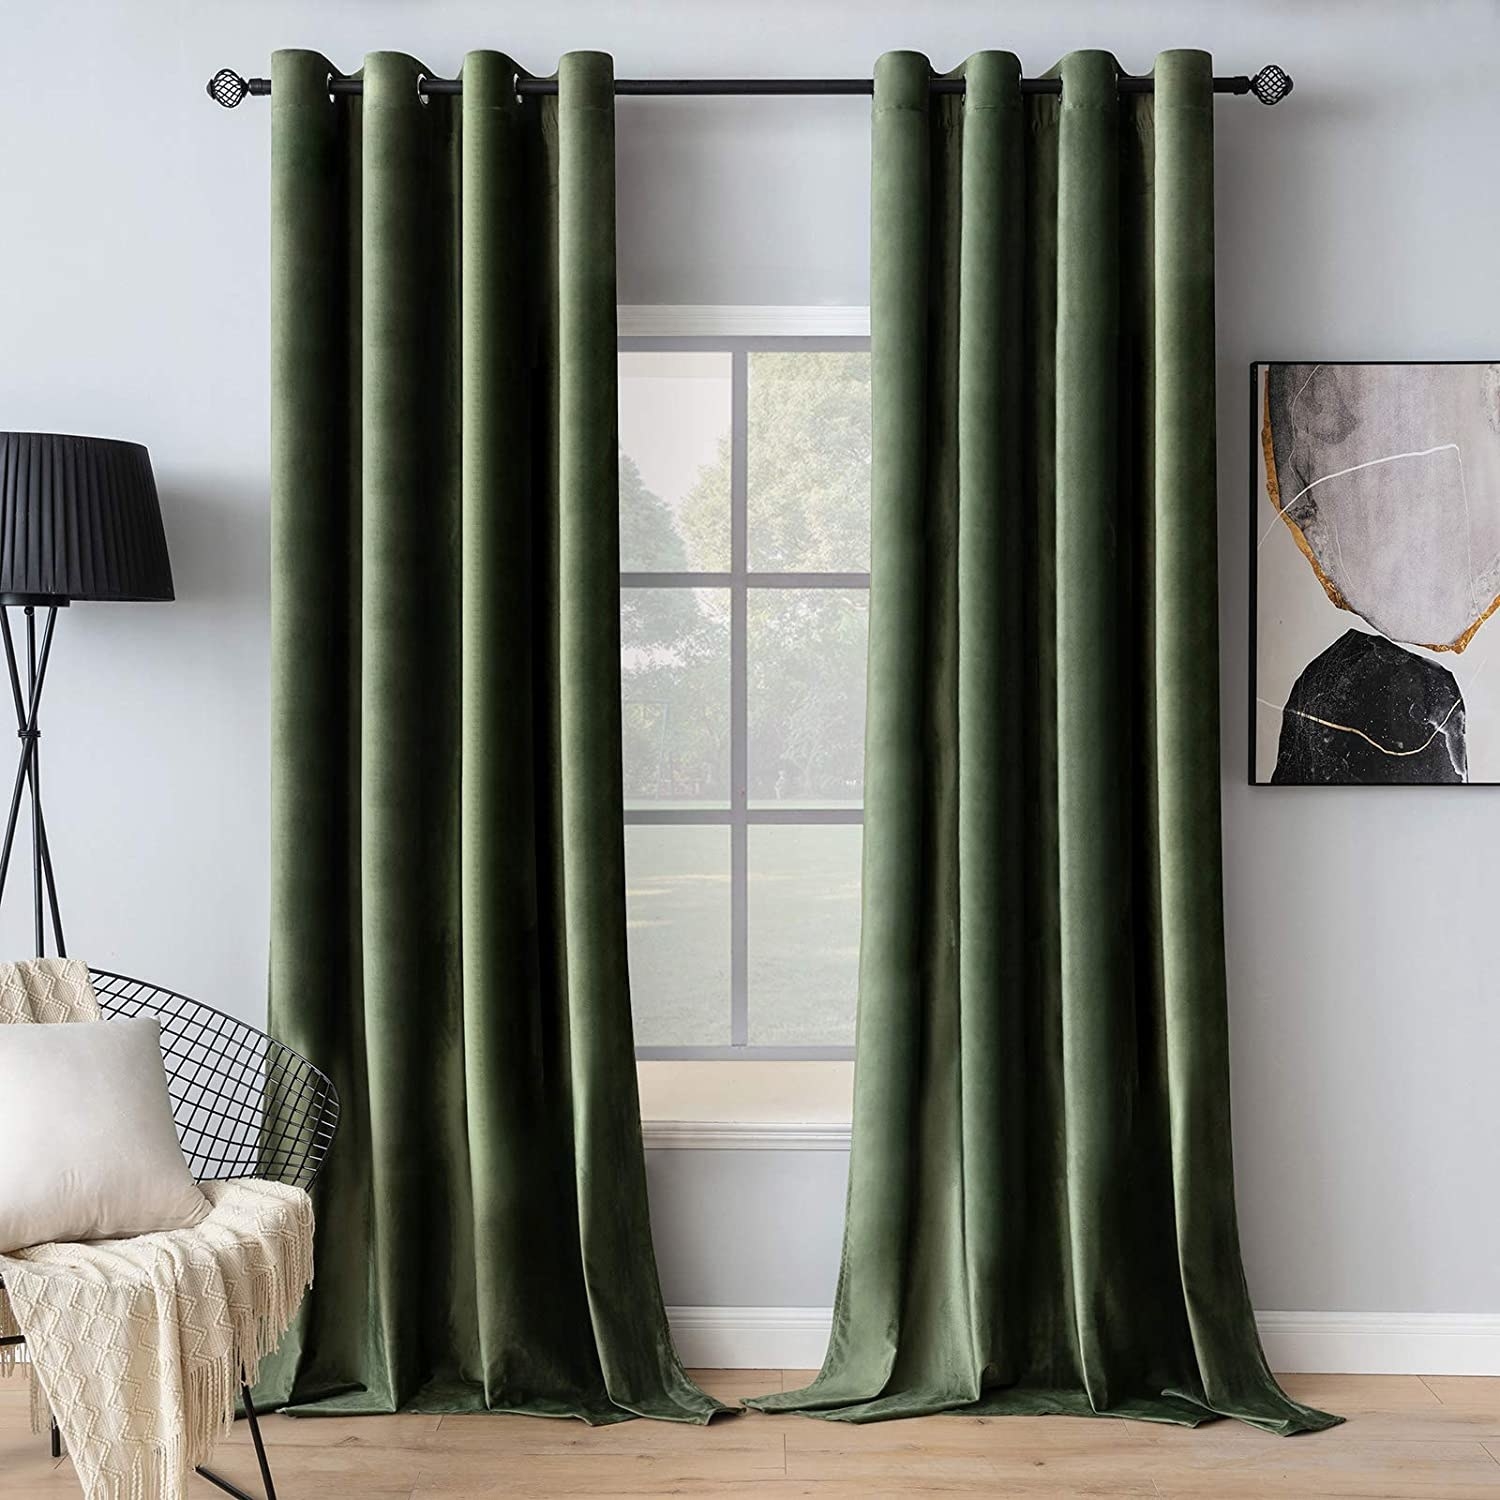 The curtains in green on a window